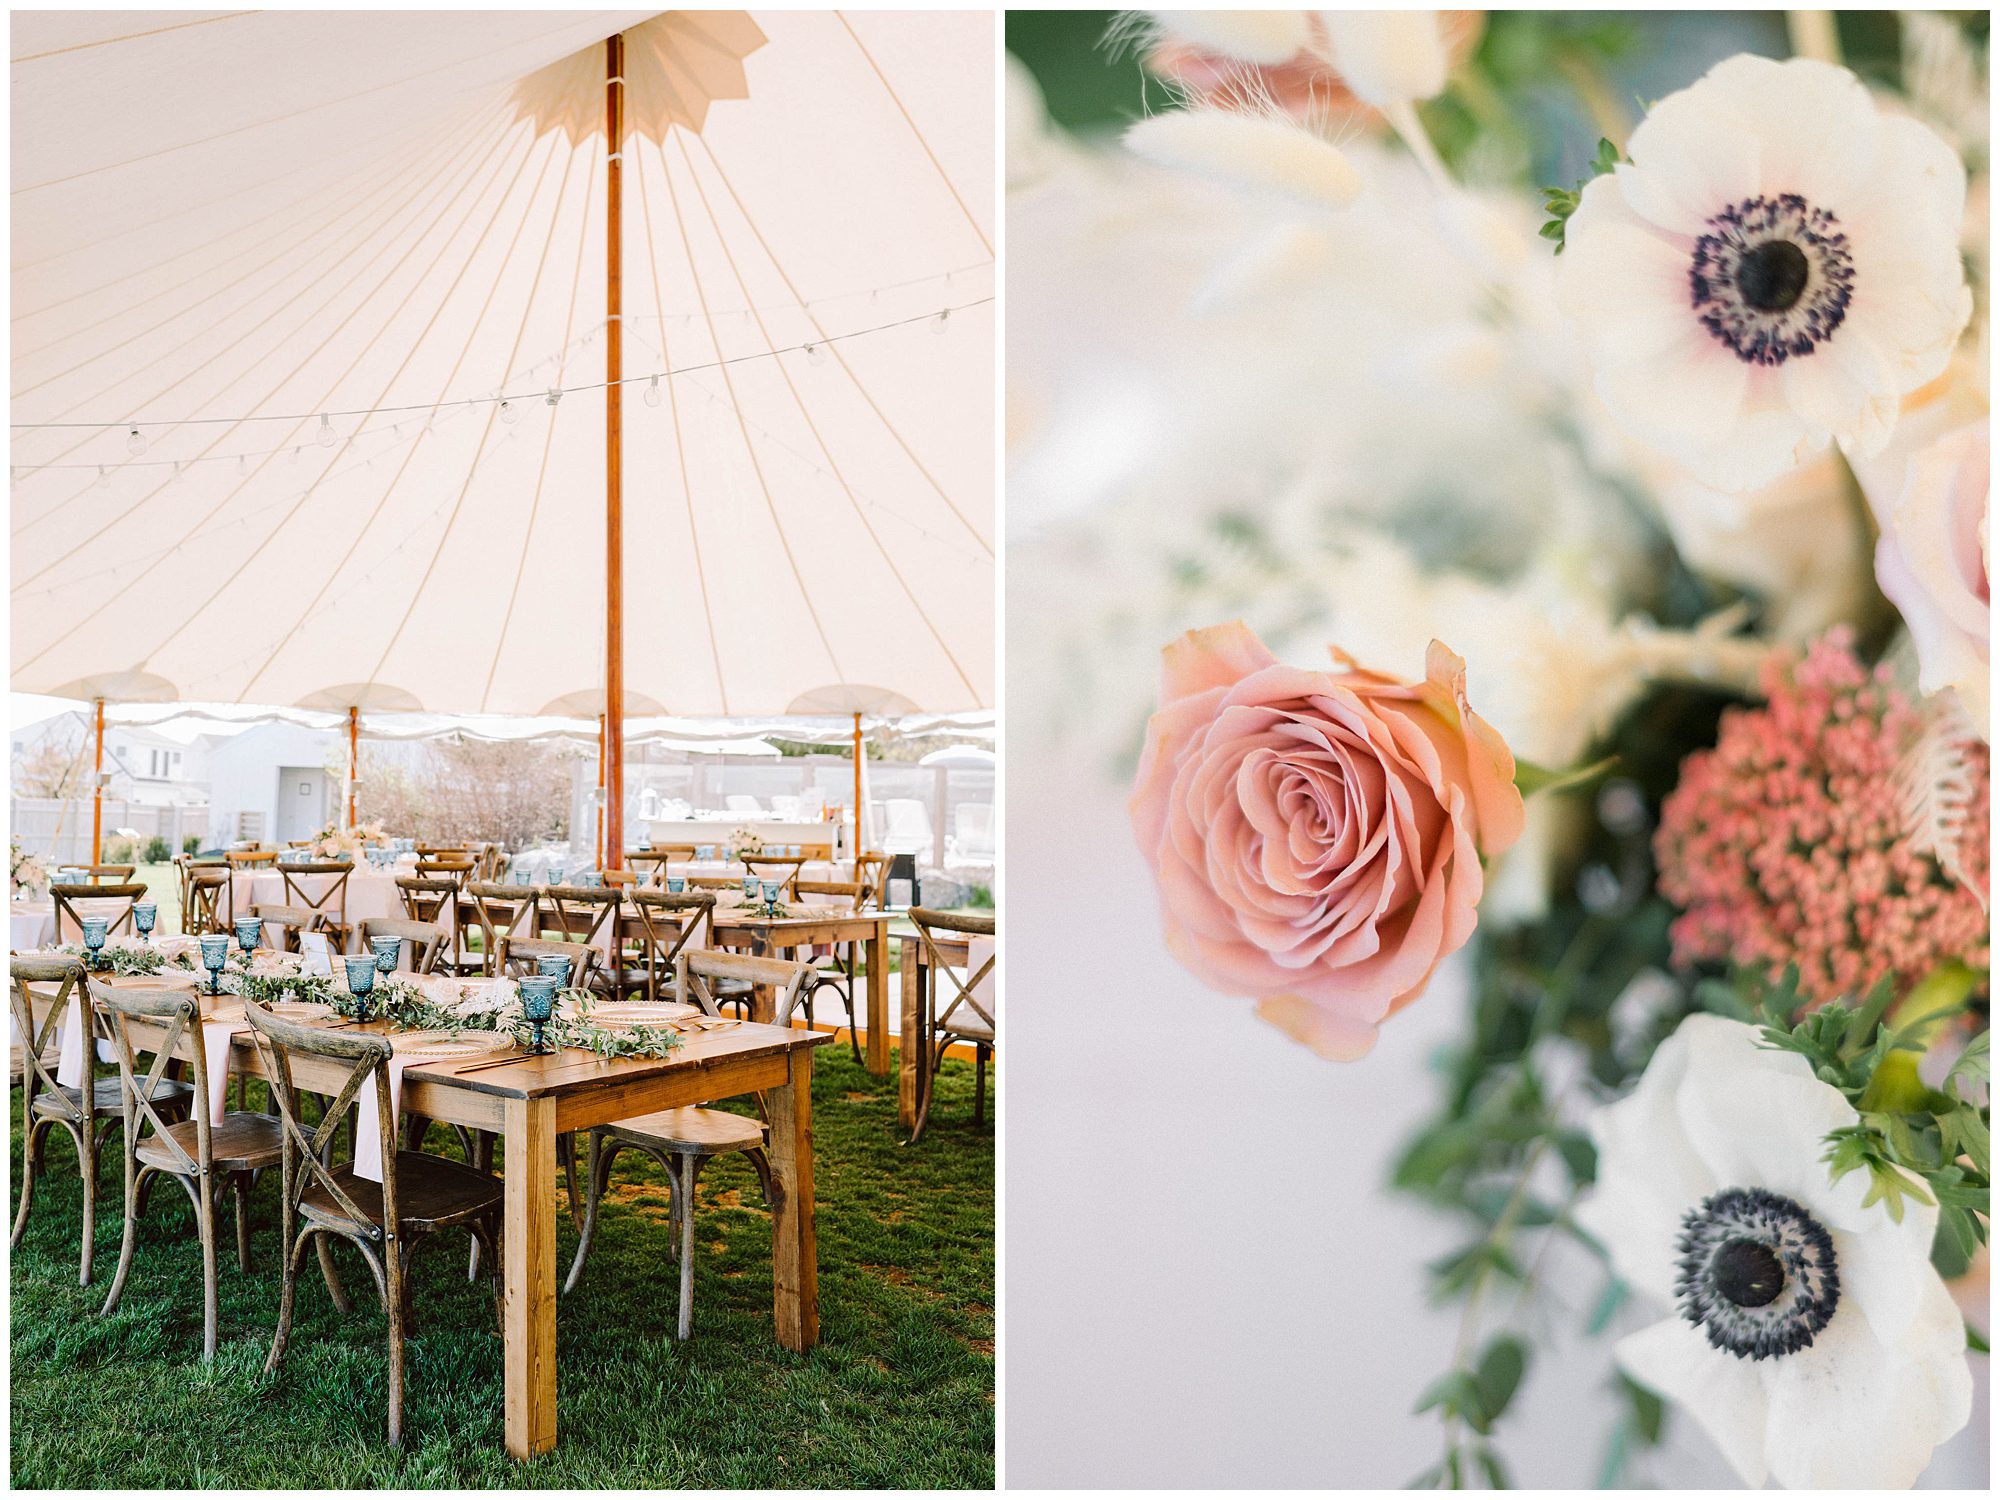 Viewpoint Hotel York Maine wedding design with blush and ivory details.